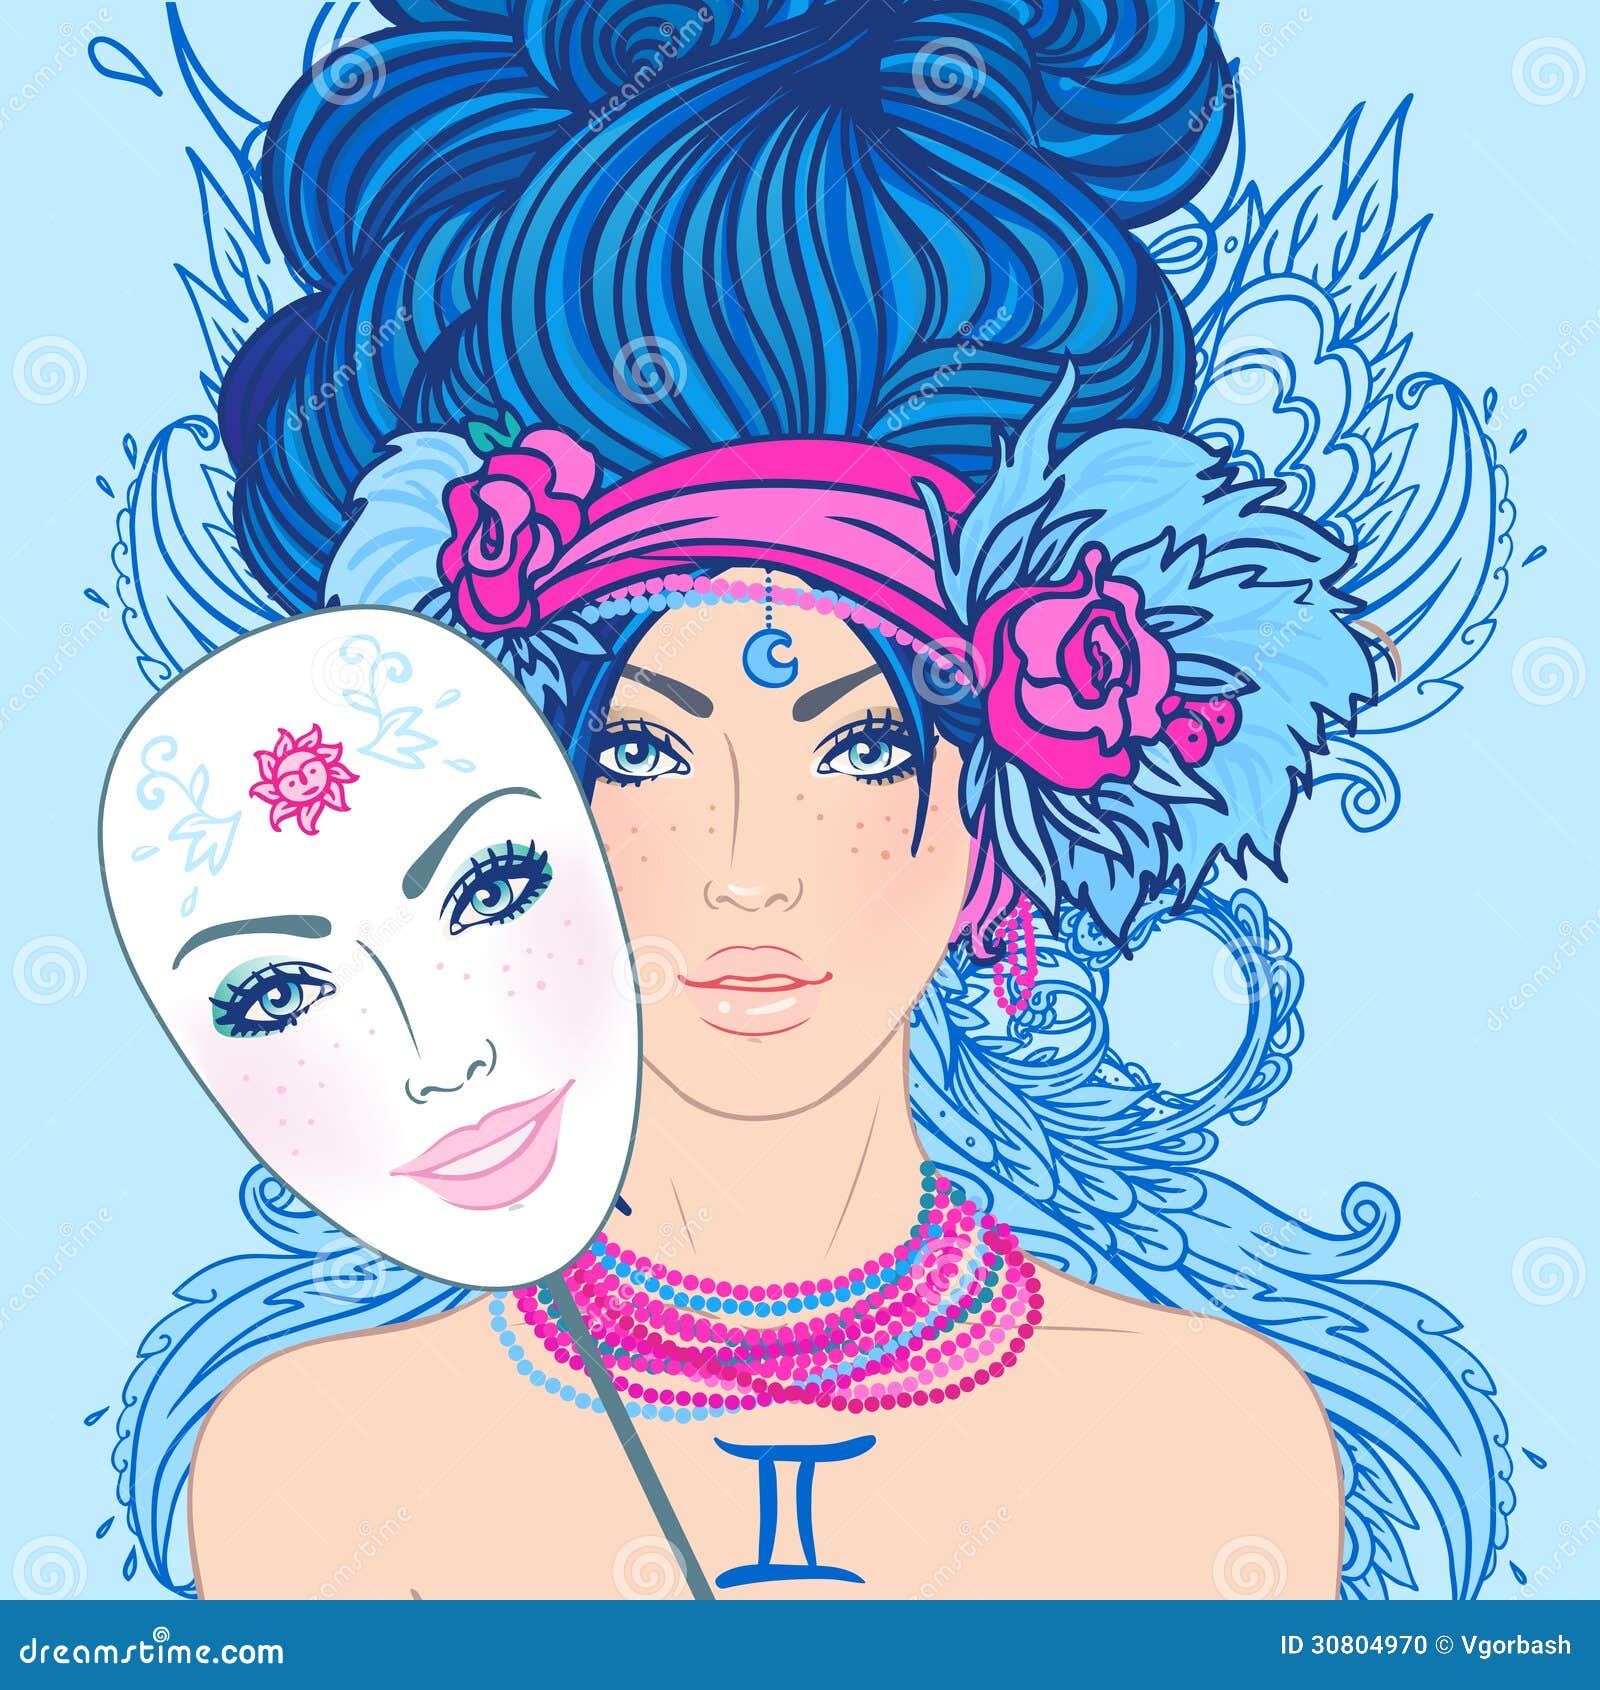 Download Illustration Of Gemini Zodiac Sign As A Beautiful Girl With Mask Stock Illustration ...